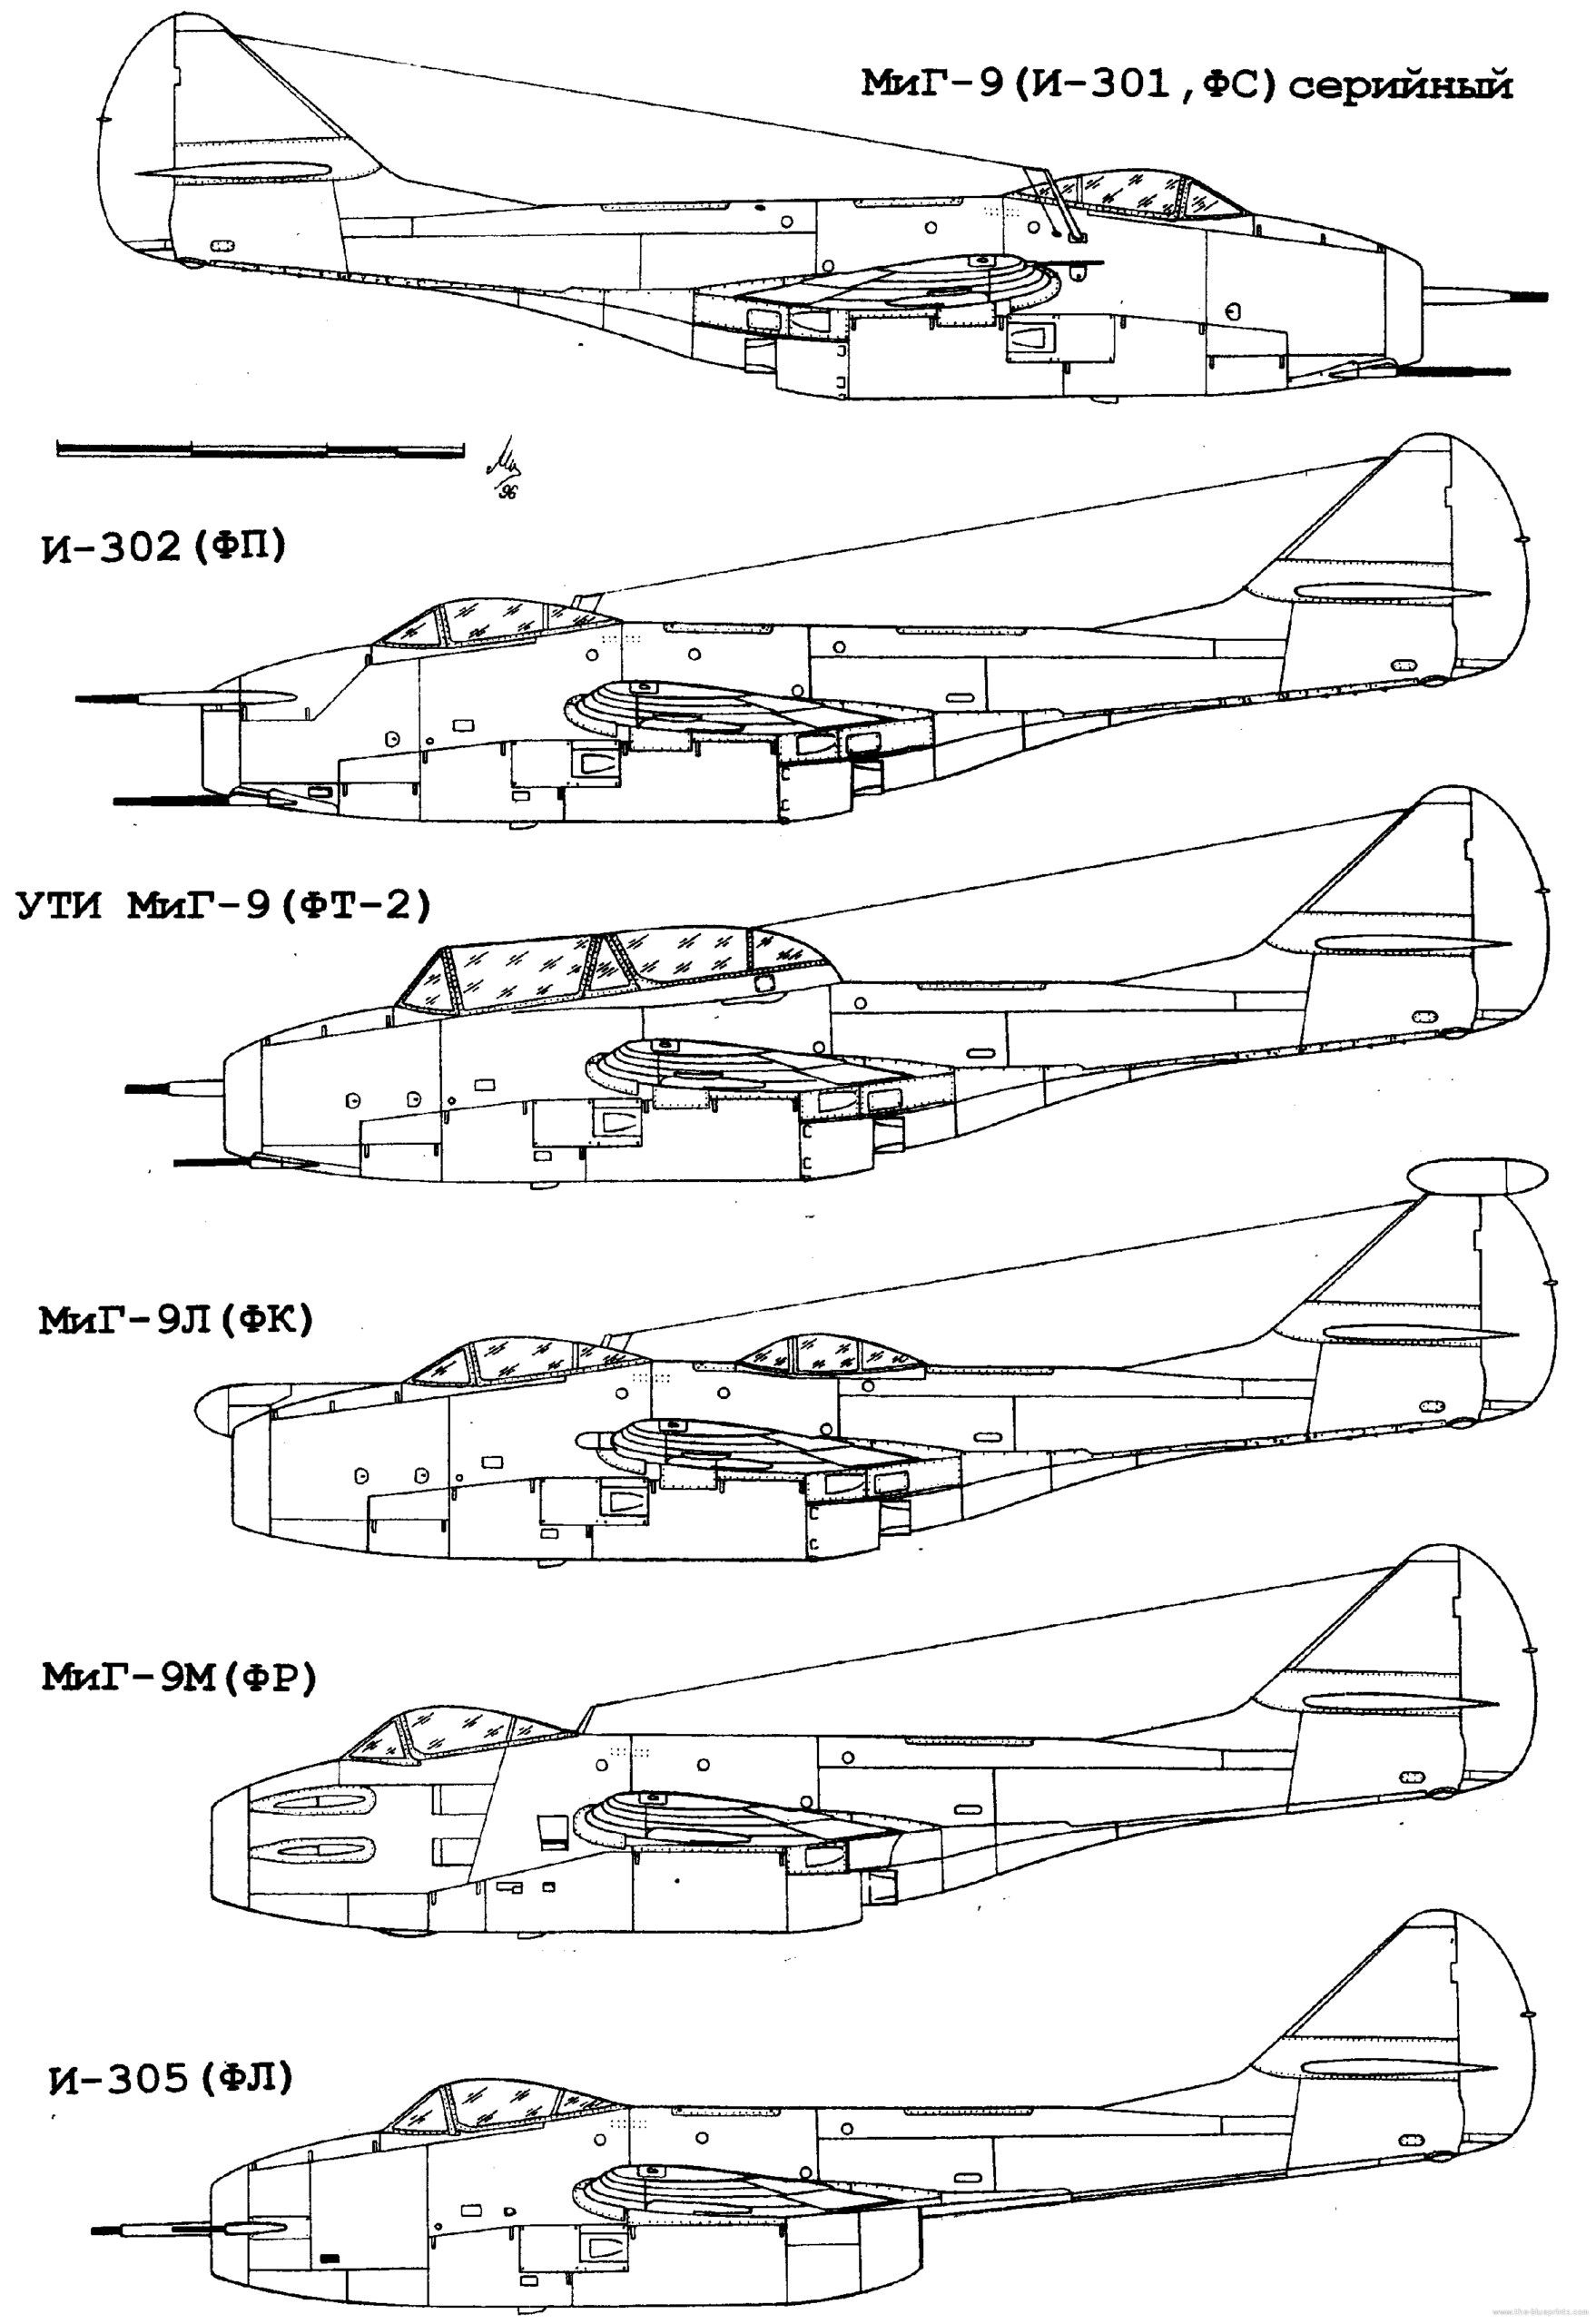 The production MiG-9 in detail